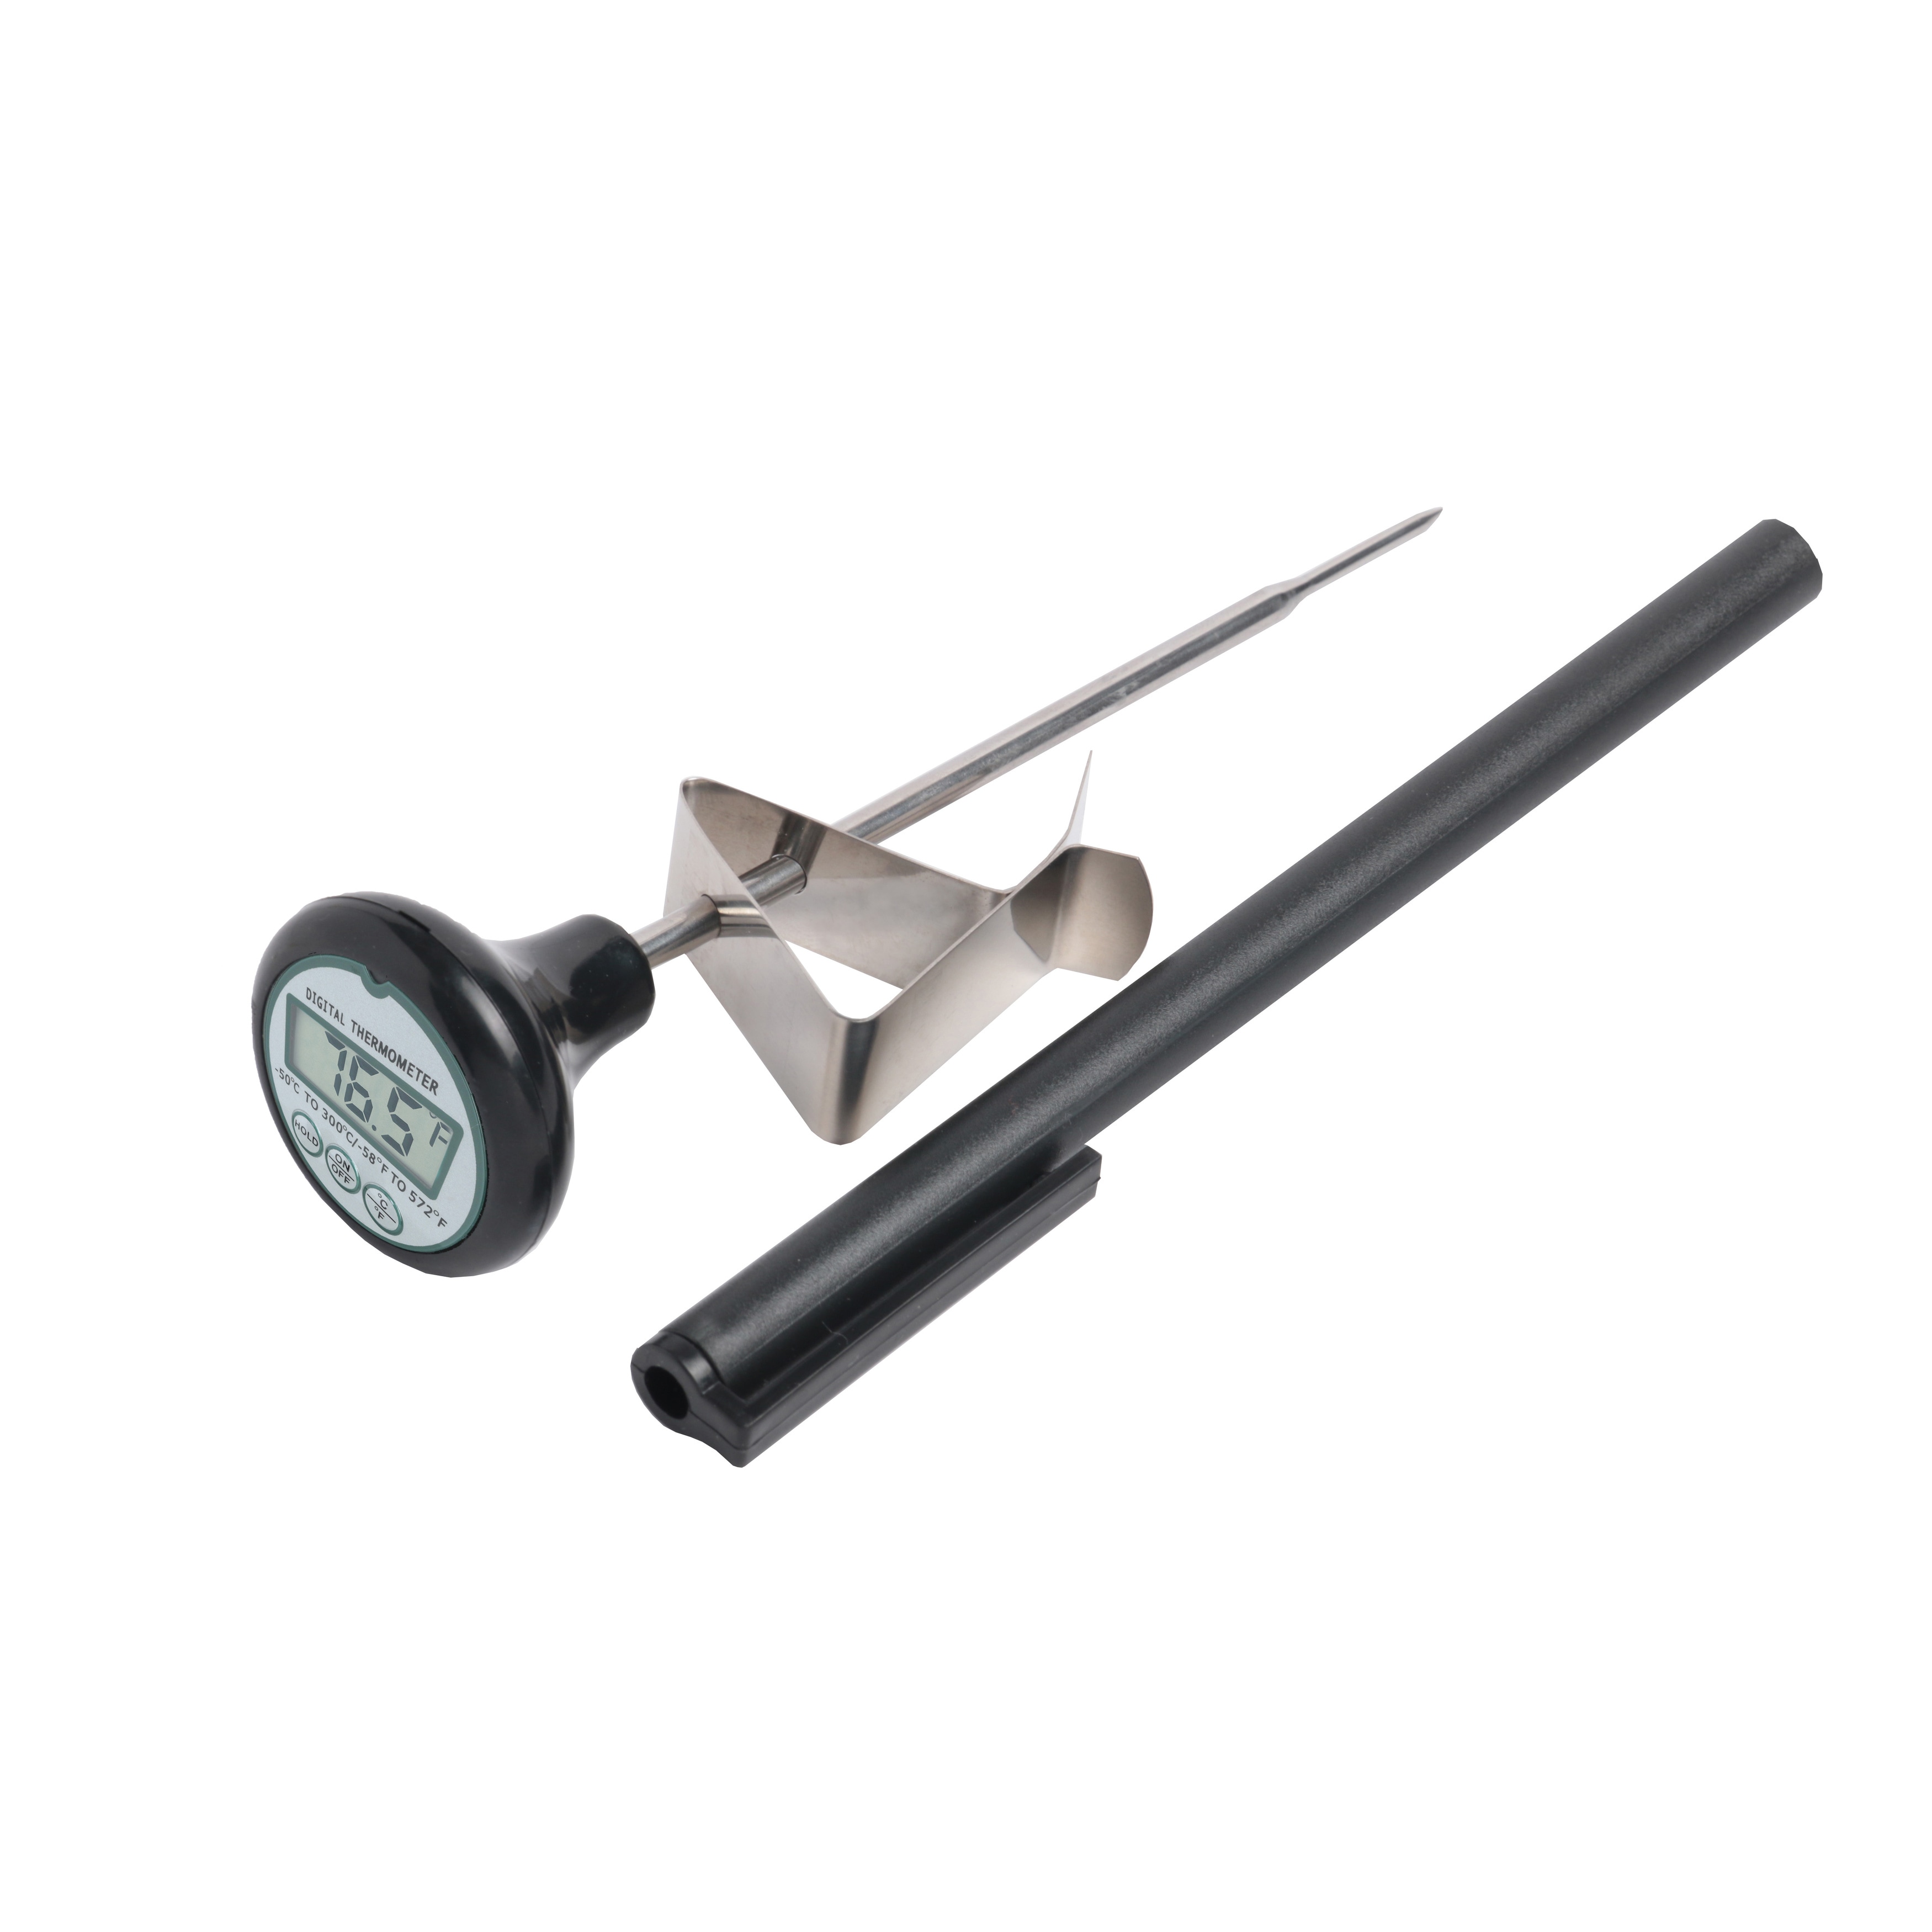 https://ak1.ostkcdn.com/images/products/11637584/Digital-Cooking-Thermometer-with-Stainless-steel-Probe-and-Pot-Clip-5cd5b981-7423-4162-b1af-2208b20d4979.jpg